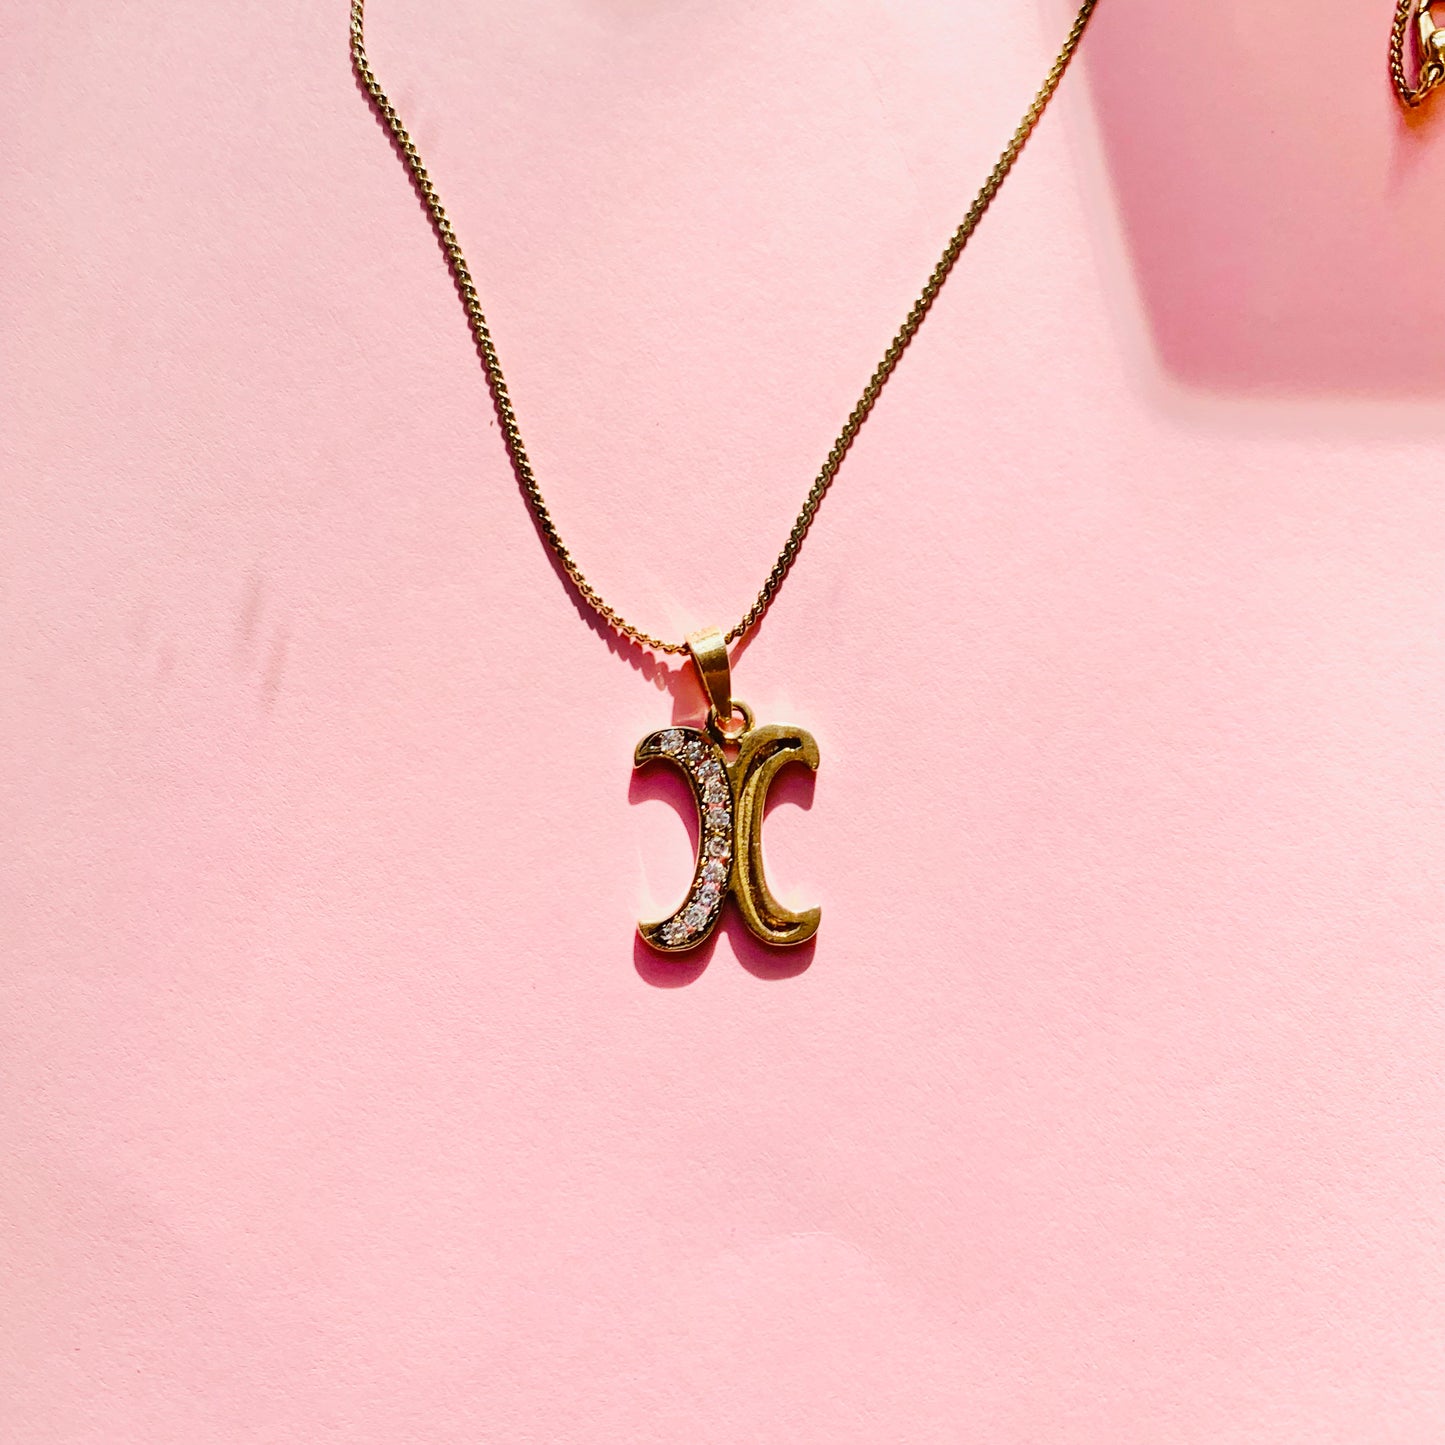 1980s rose gold necklace with reverse C pendant